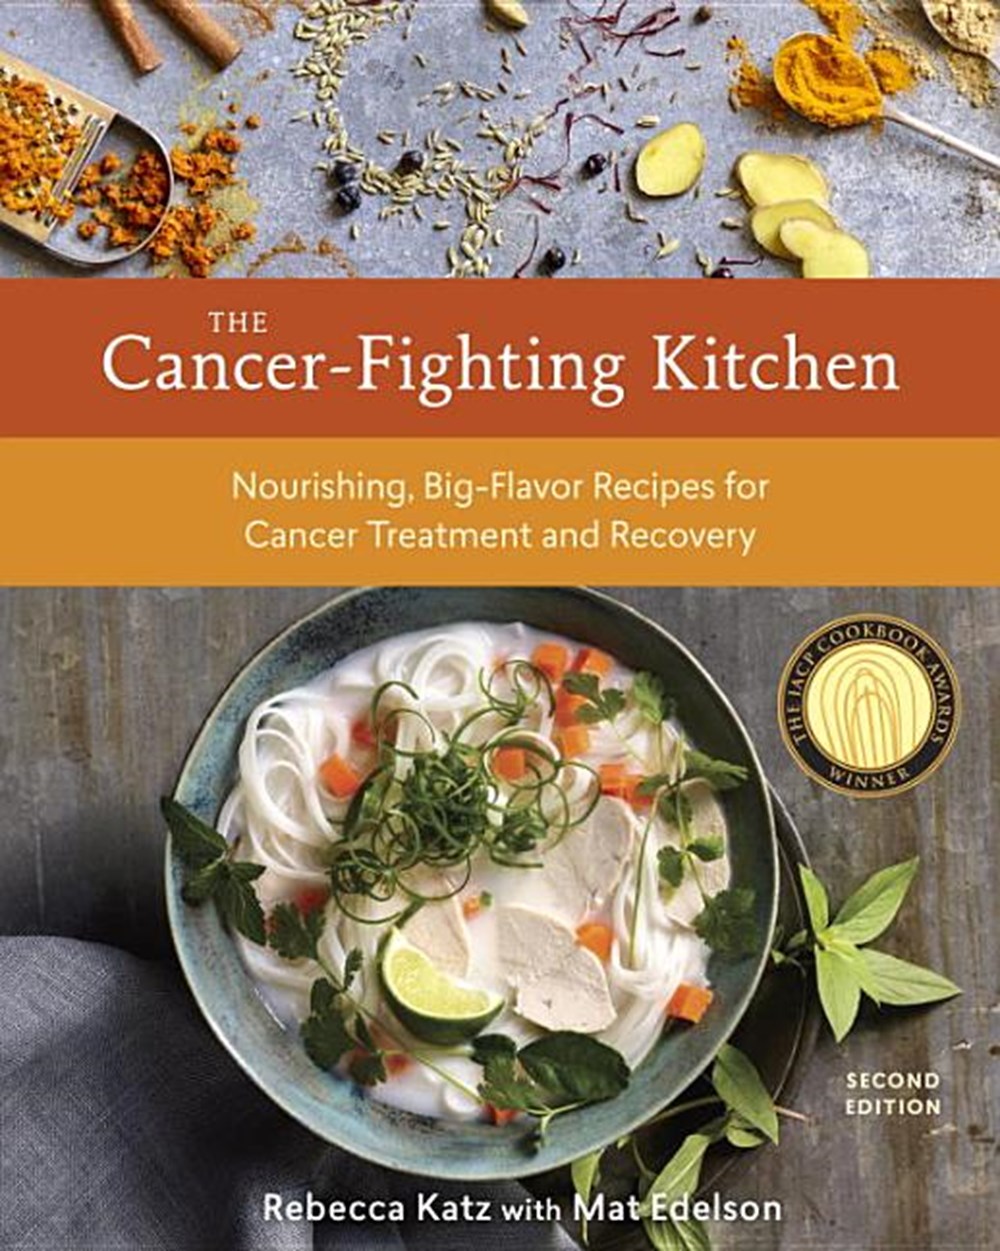 Cancer-Fighting Kitchen, Second Edition: Nourishing, Big-Flavor Recipes for Cancer Treatment and Rec